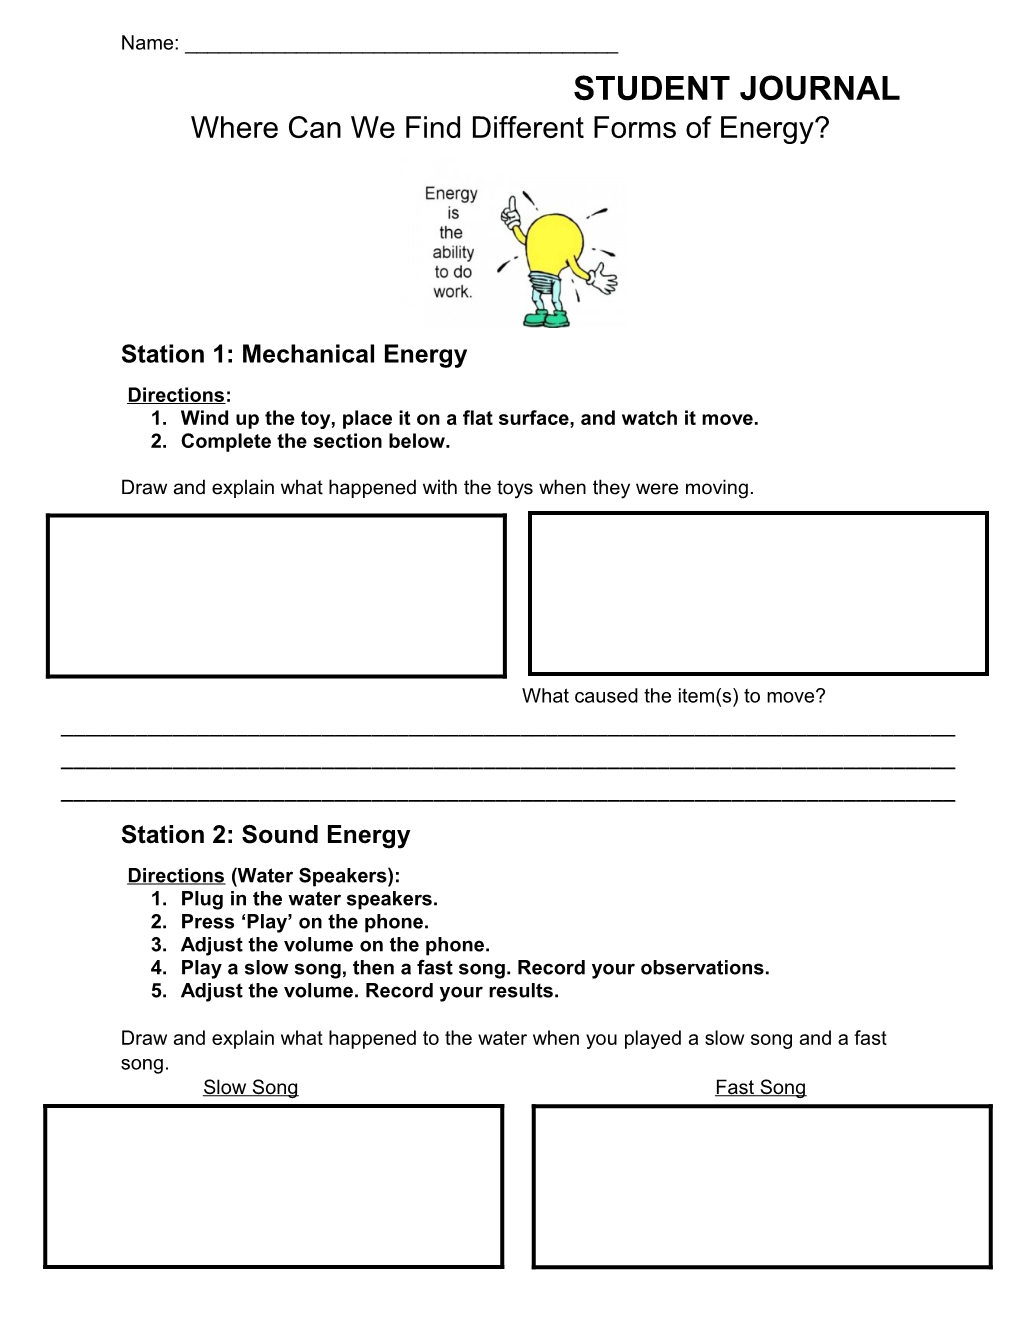 Where Can We Find Different Forms of Energy?